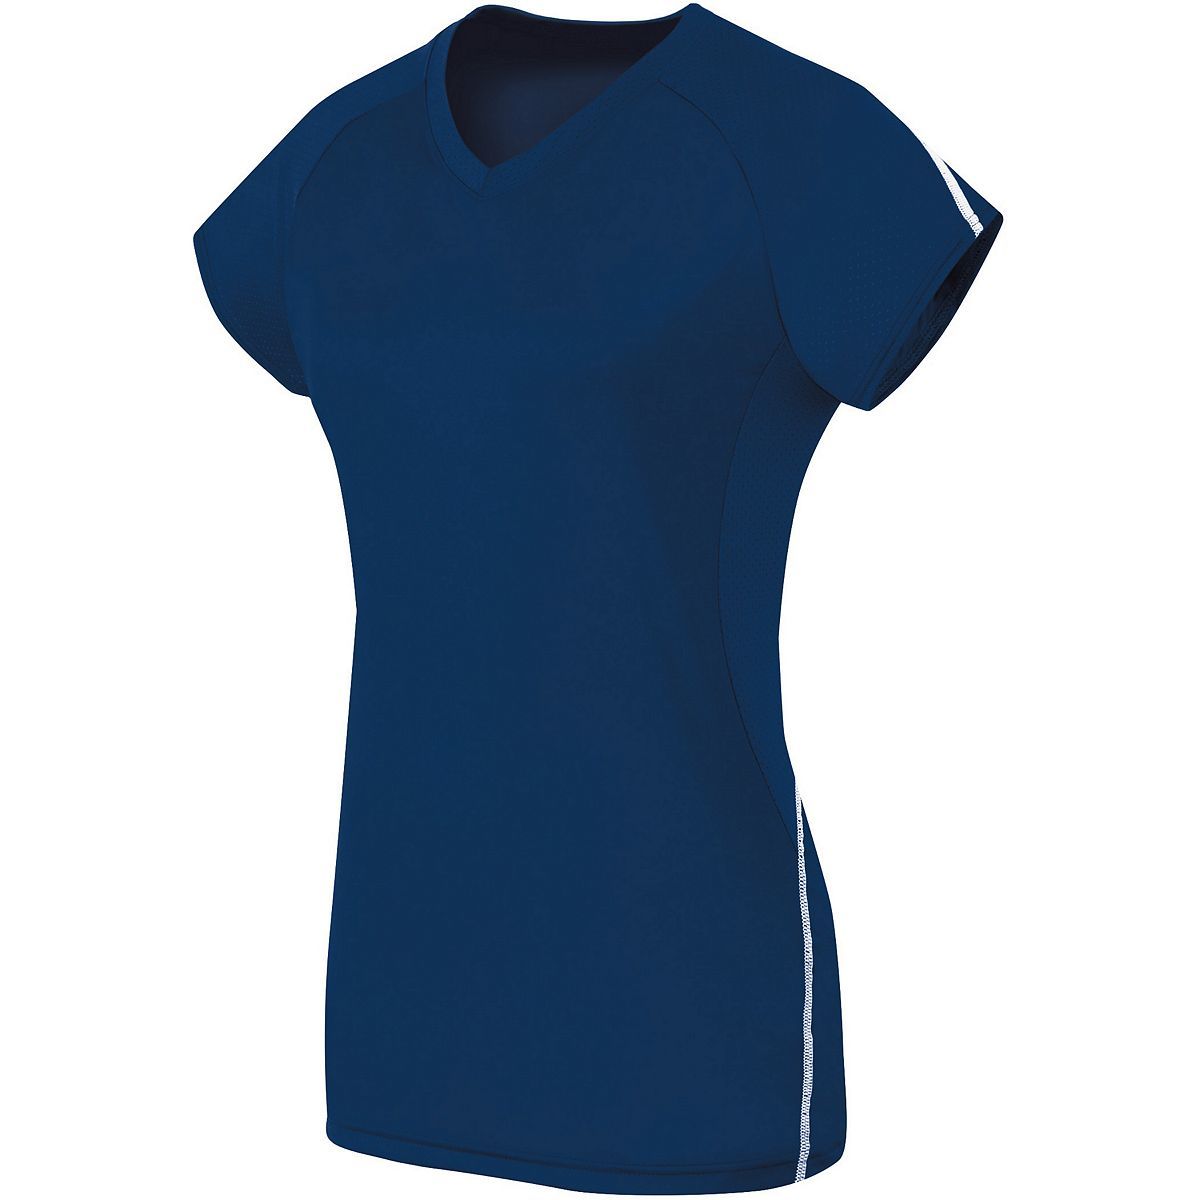 High 5 Ladies Short Sleeve Solid Jersey in Navy/White  -Part of the Ladies, Ladies-Jersey, High5-Products, Volleyball, Shirts product lines at KanaleyCreations.com